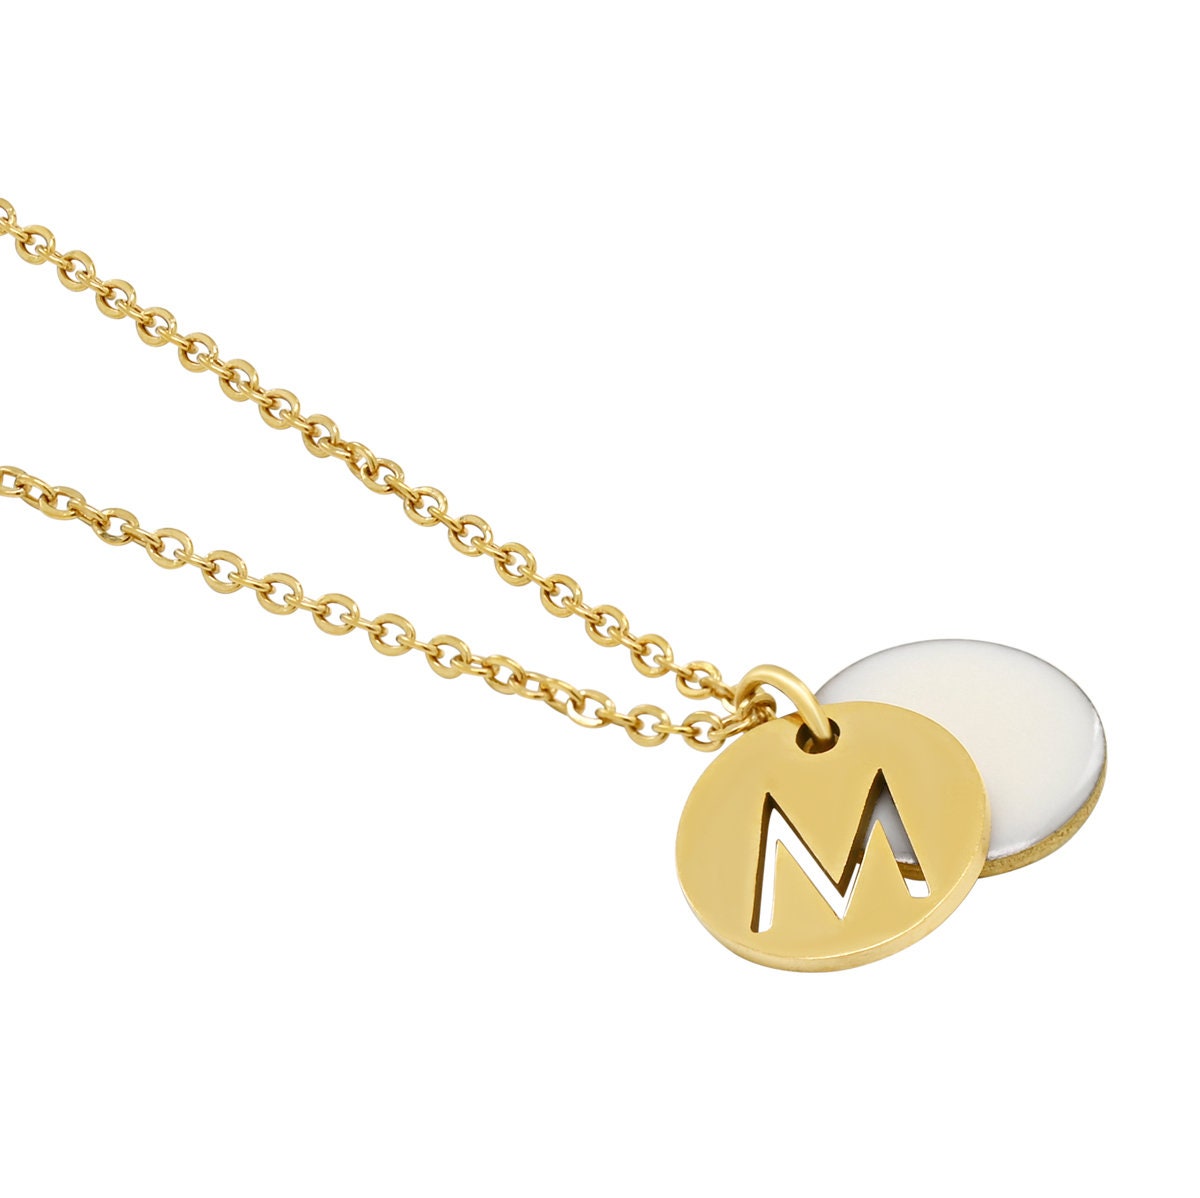 "Le Délice" Waterproof "Imperméable” Personalized Initial Necklace with White Enamel Charm